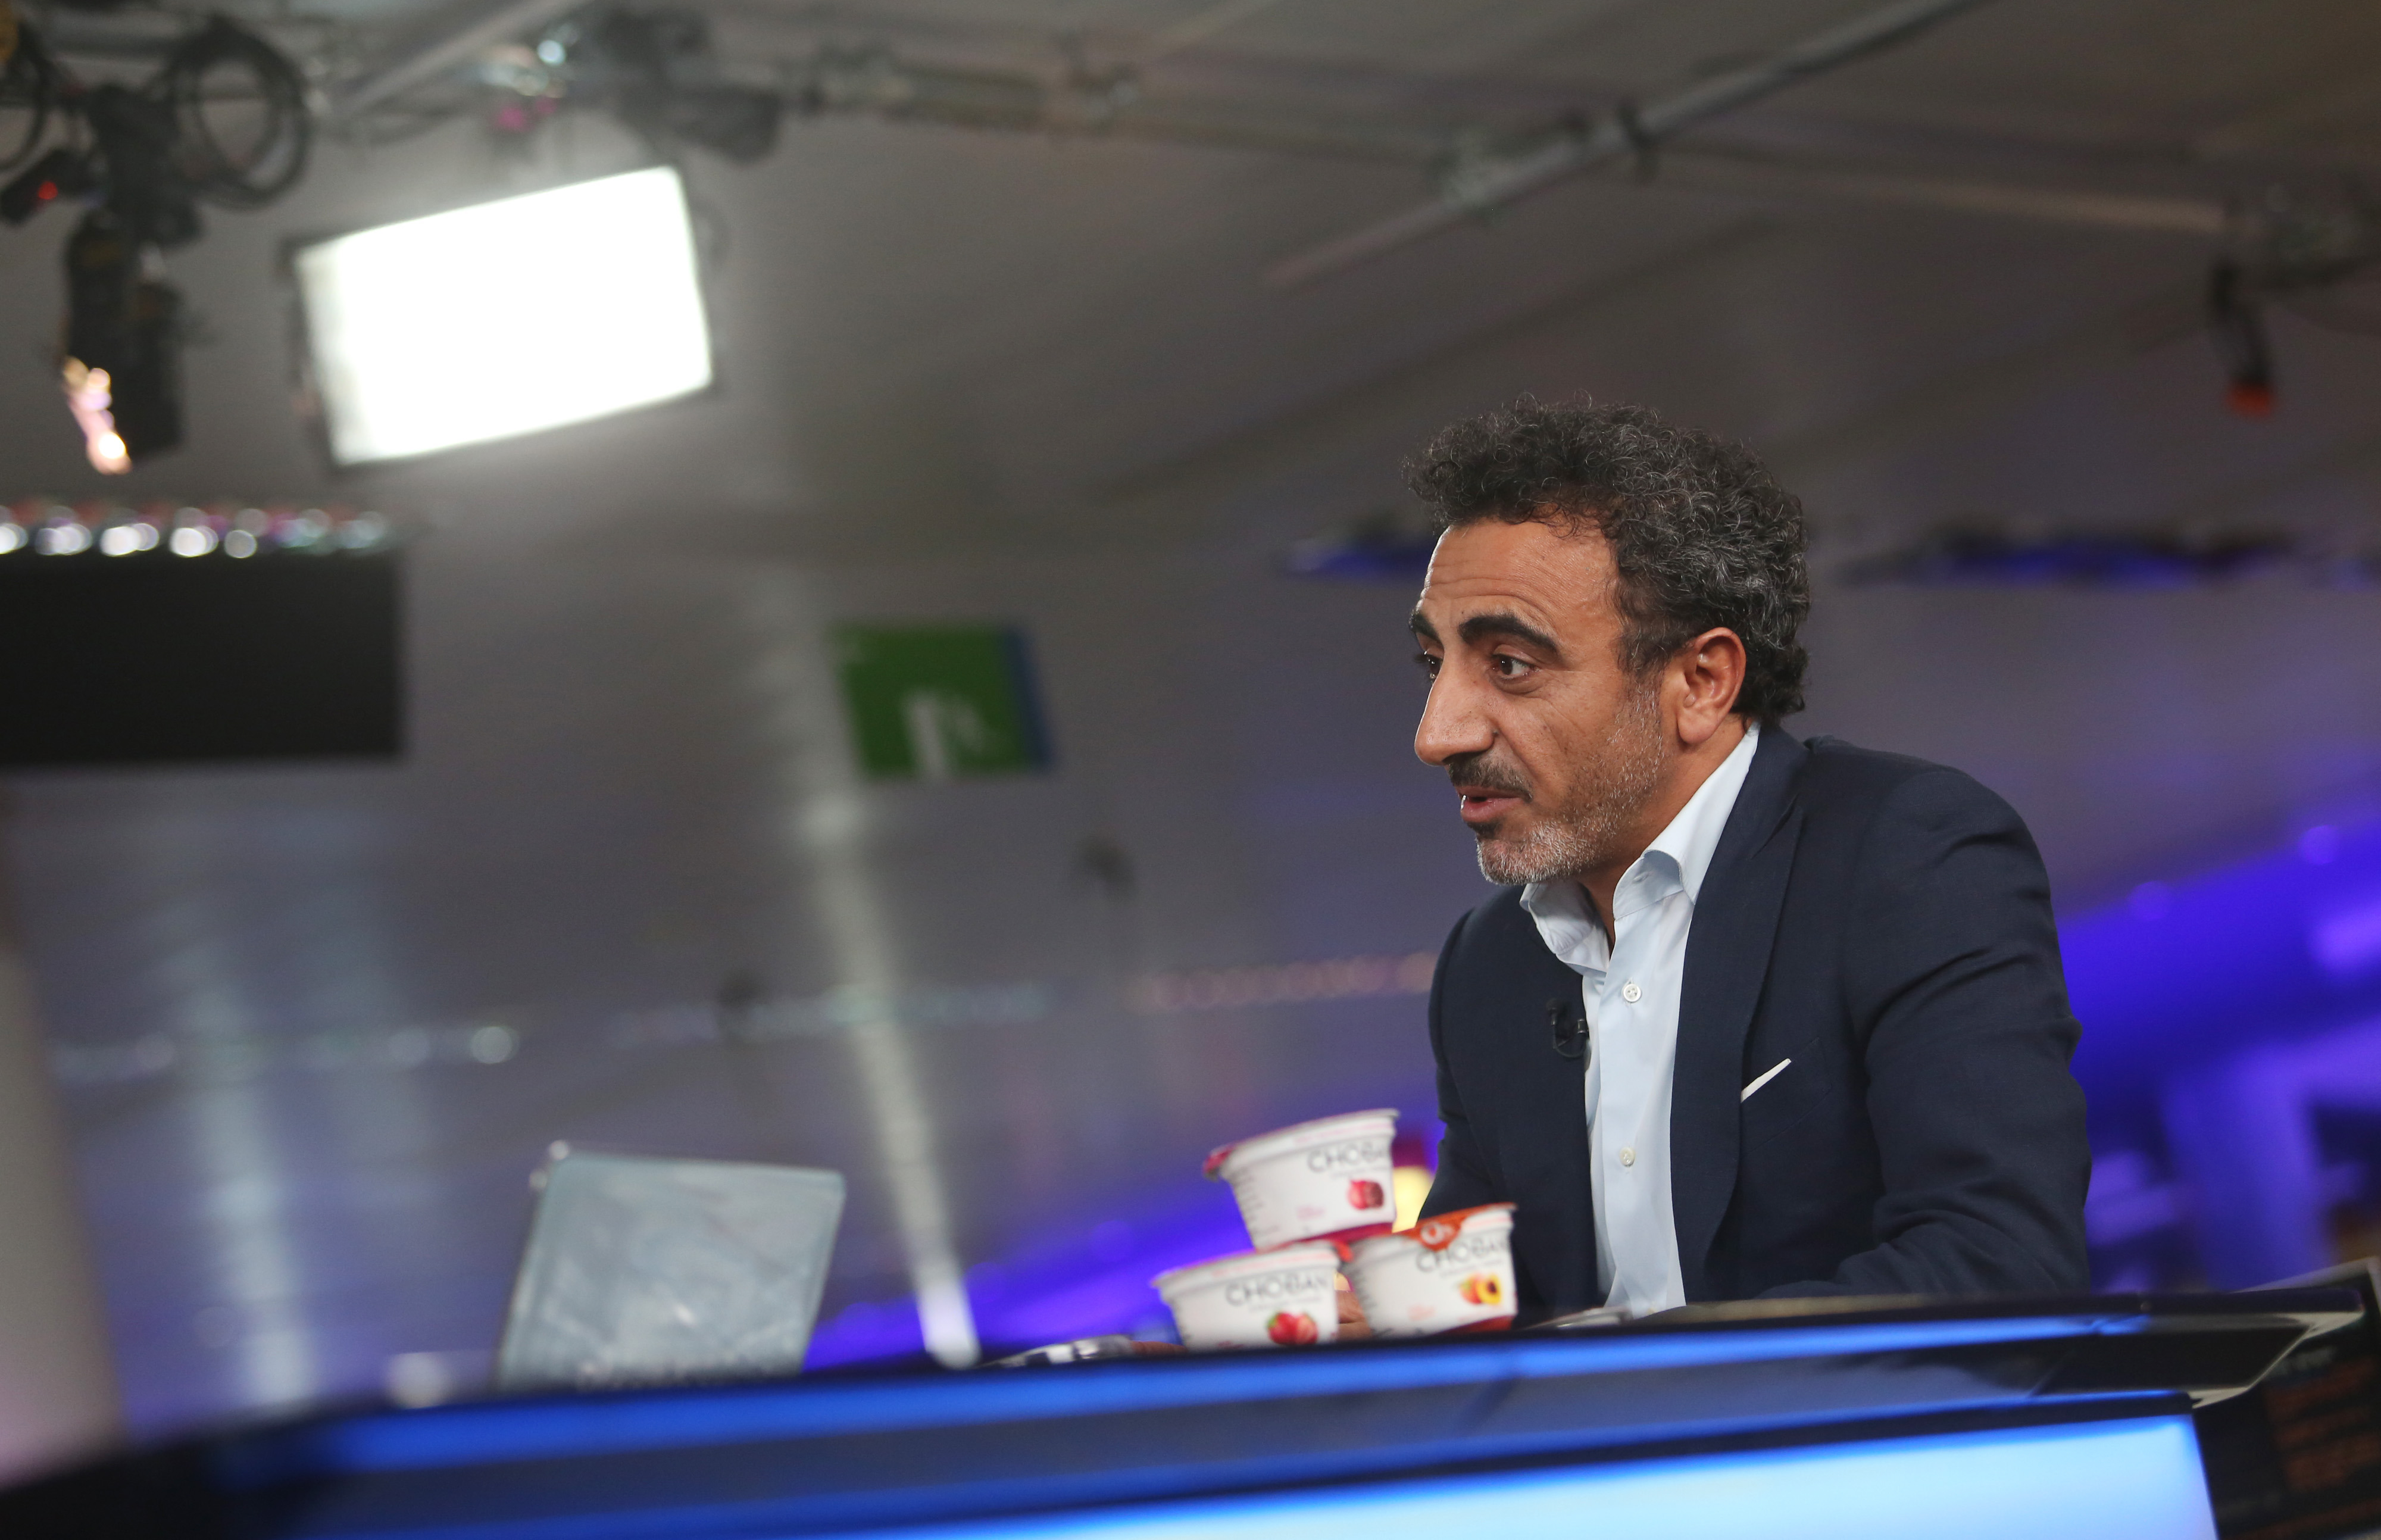 Hamdi Ulukaya, a billionaire and founder, president and chief executive officer of Chobani Inc., speaks during a Bloomberg Television interview in London, U.K. on Wednesday, July 17, 2013. Chobani, the best-selling yogurt brand in the U.S., has given Ulukaya a net worth of $1.1 billion. Photographer: Chris Ratcliffe/Bloomberg via Getty Images (Bloomberg&mdash;Bloomberg via Getty Images)